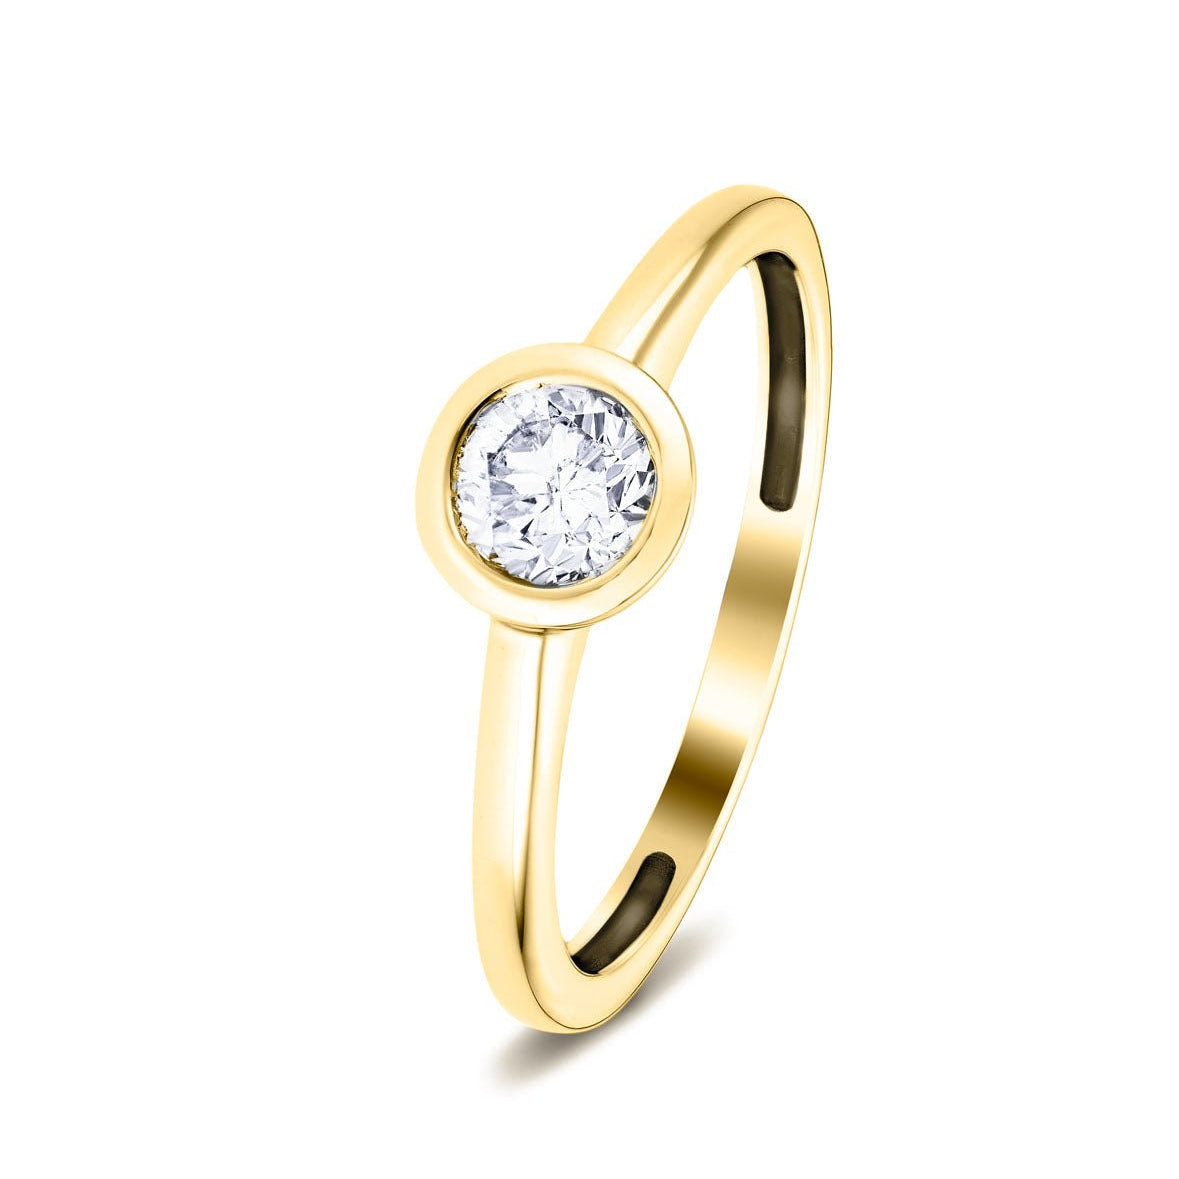 Certified Rub Over Diamond Solitaire Engagement Ring 0.33ct G/SI 18k Yellow Gold - All Diamond